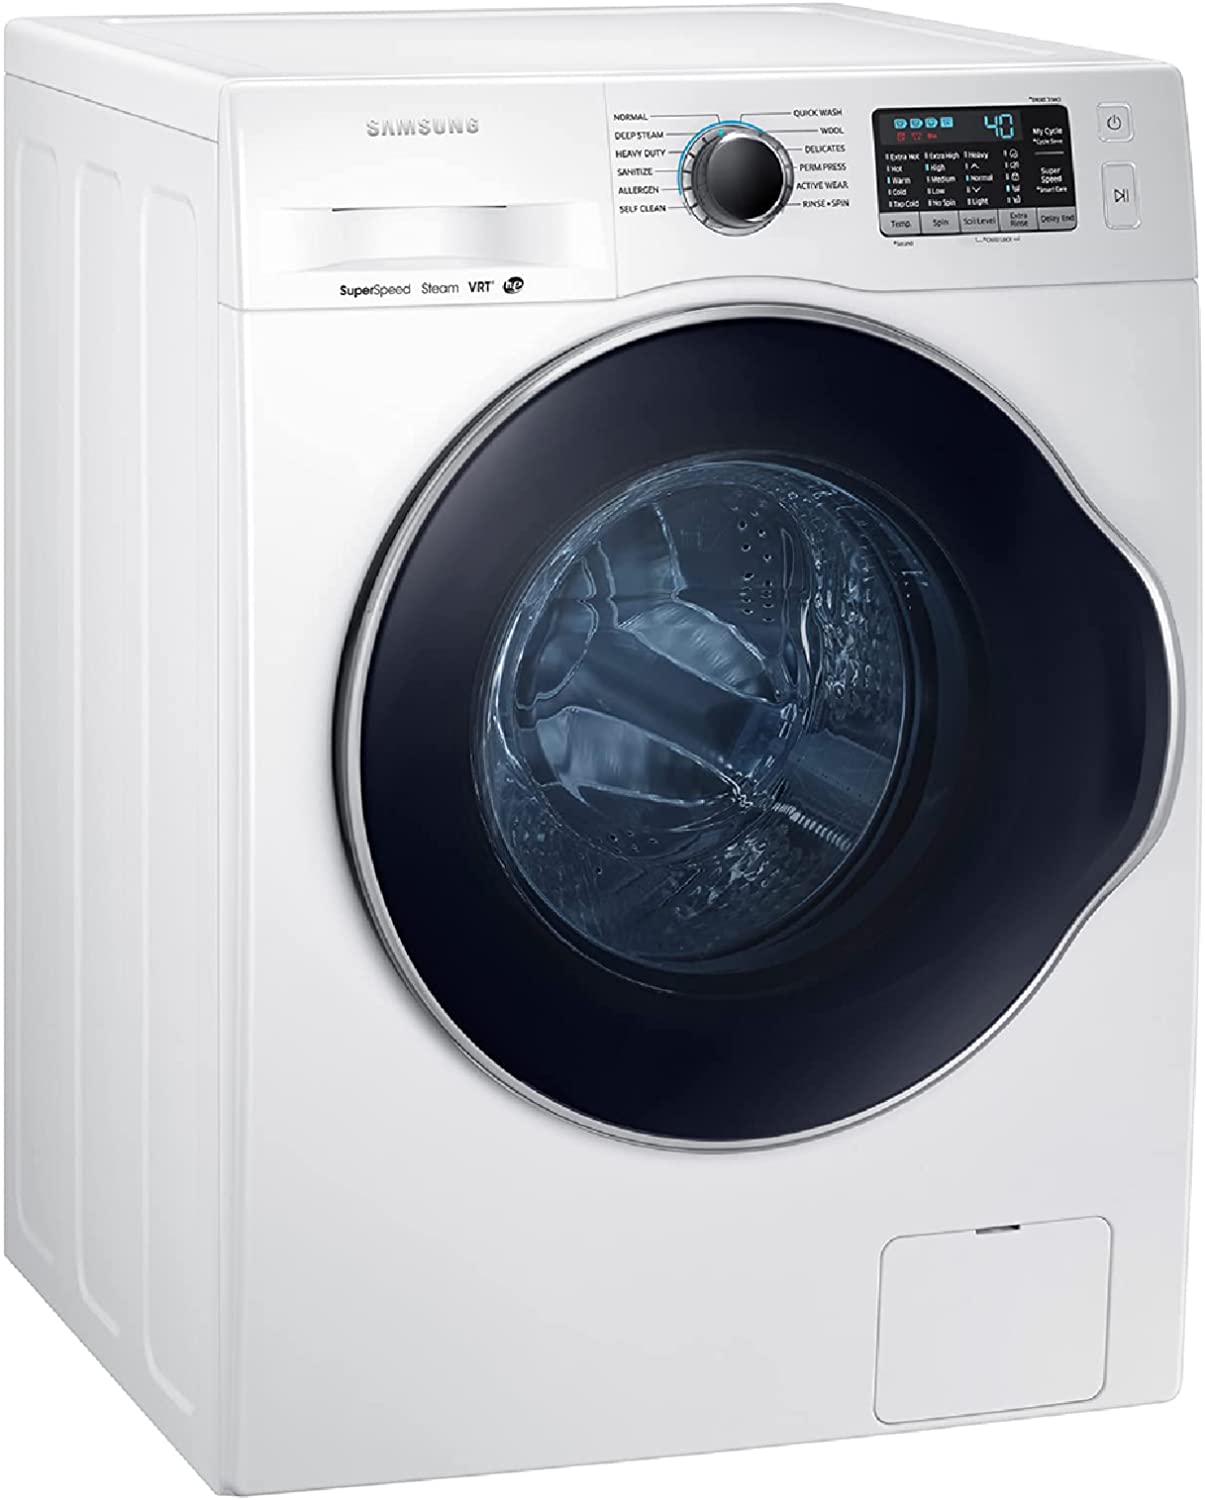 6. SAMSUNG Compact Front Load Washer